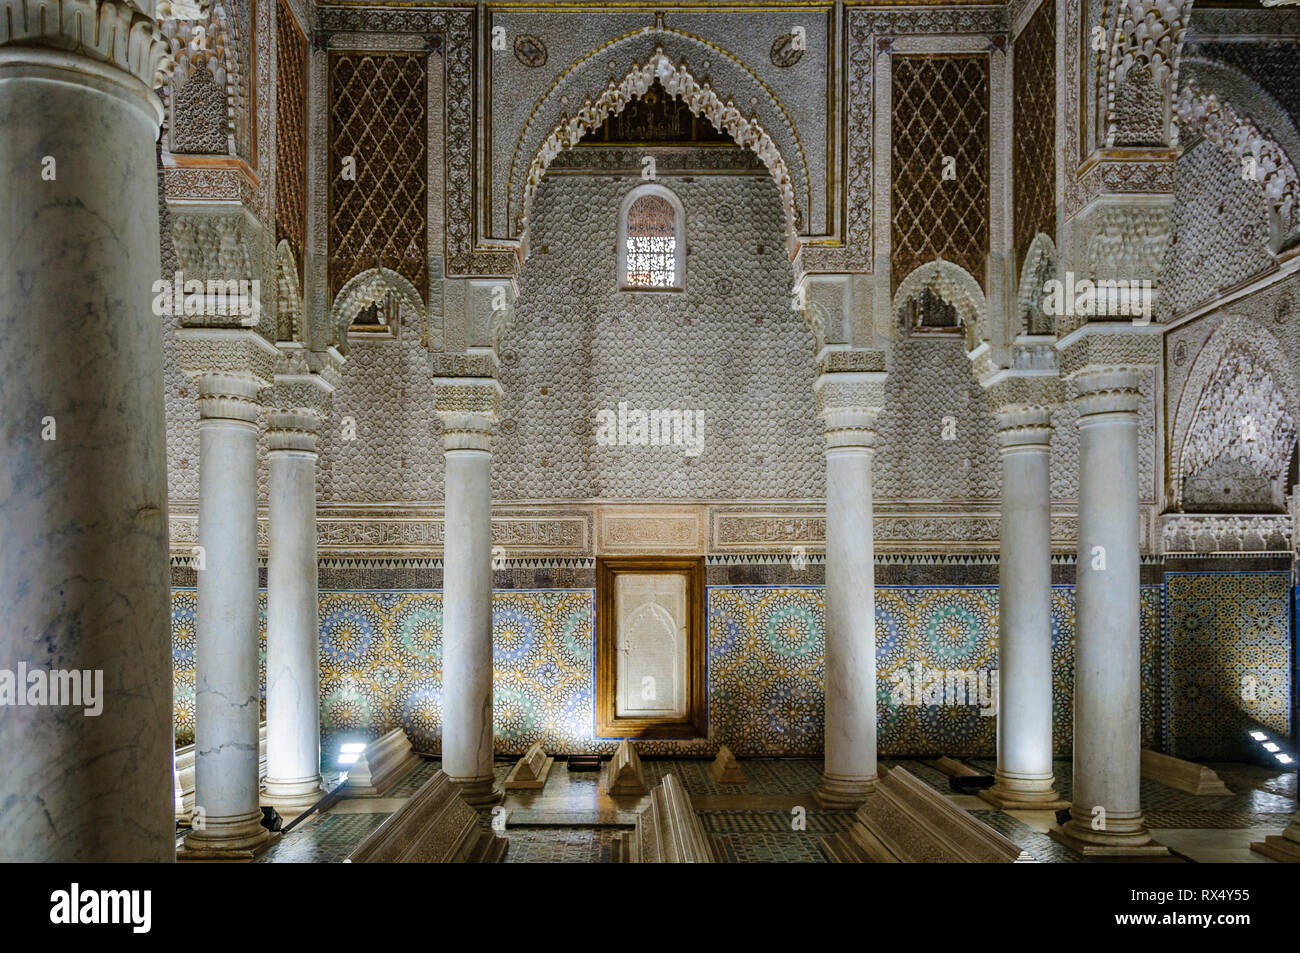 Columns in the Saadian Tombs in the Medina of Marrakech, Morocco Stock Photo